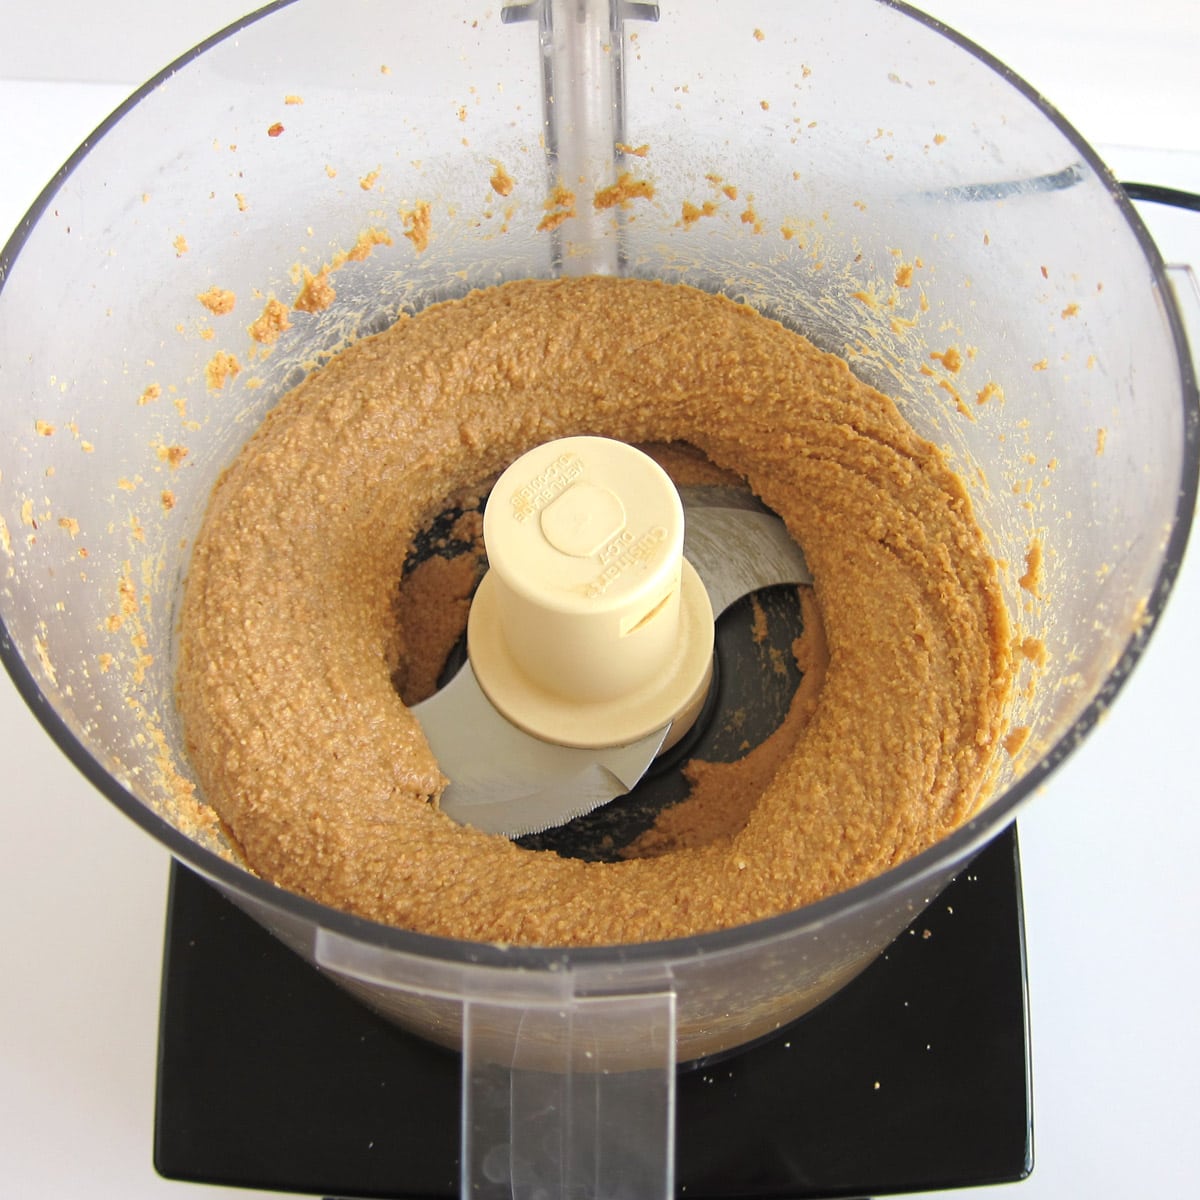 chunky peanut butter made in a food processor.